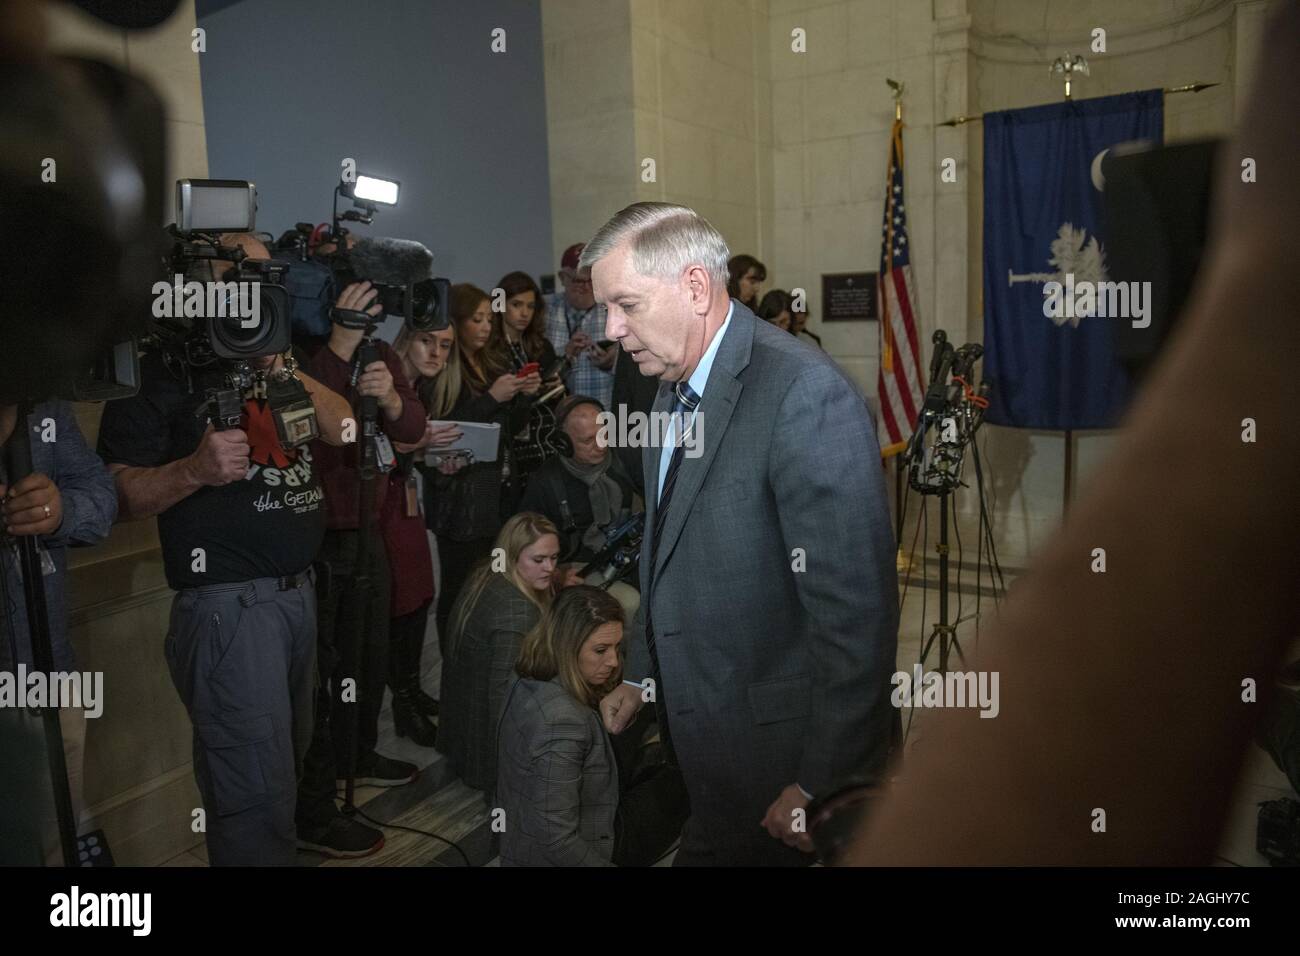 Washington, District of Columbia, USA. 18th Dec, 2019. United States Senator Lindsey Graham (Republican of South Carolina), Chairman, US Senate Judiciary Committee, departs after meeting reporters outside his Capitol Hill office to discuss the impeachment proceedings, the latest news on the FISA process, and to discuss his plans for the committee in 2020 Credit: Ron Sachs/CNP/ZUMA Wire/Alamy Live News Stock Photo